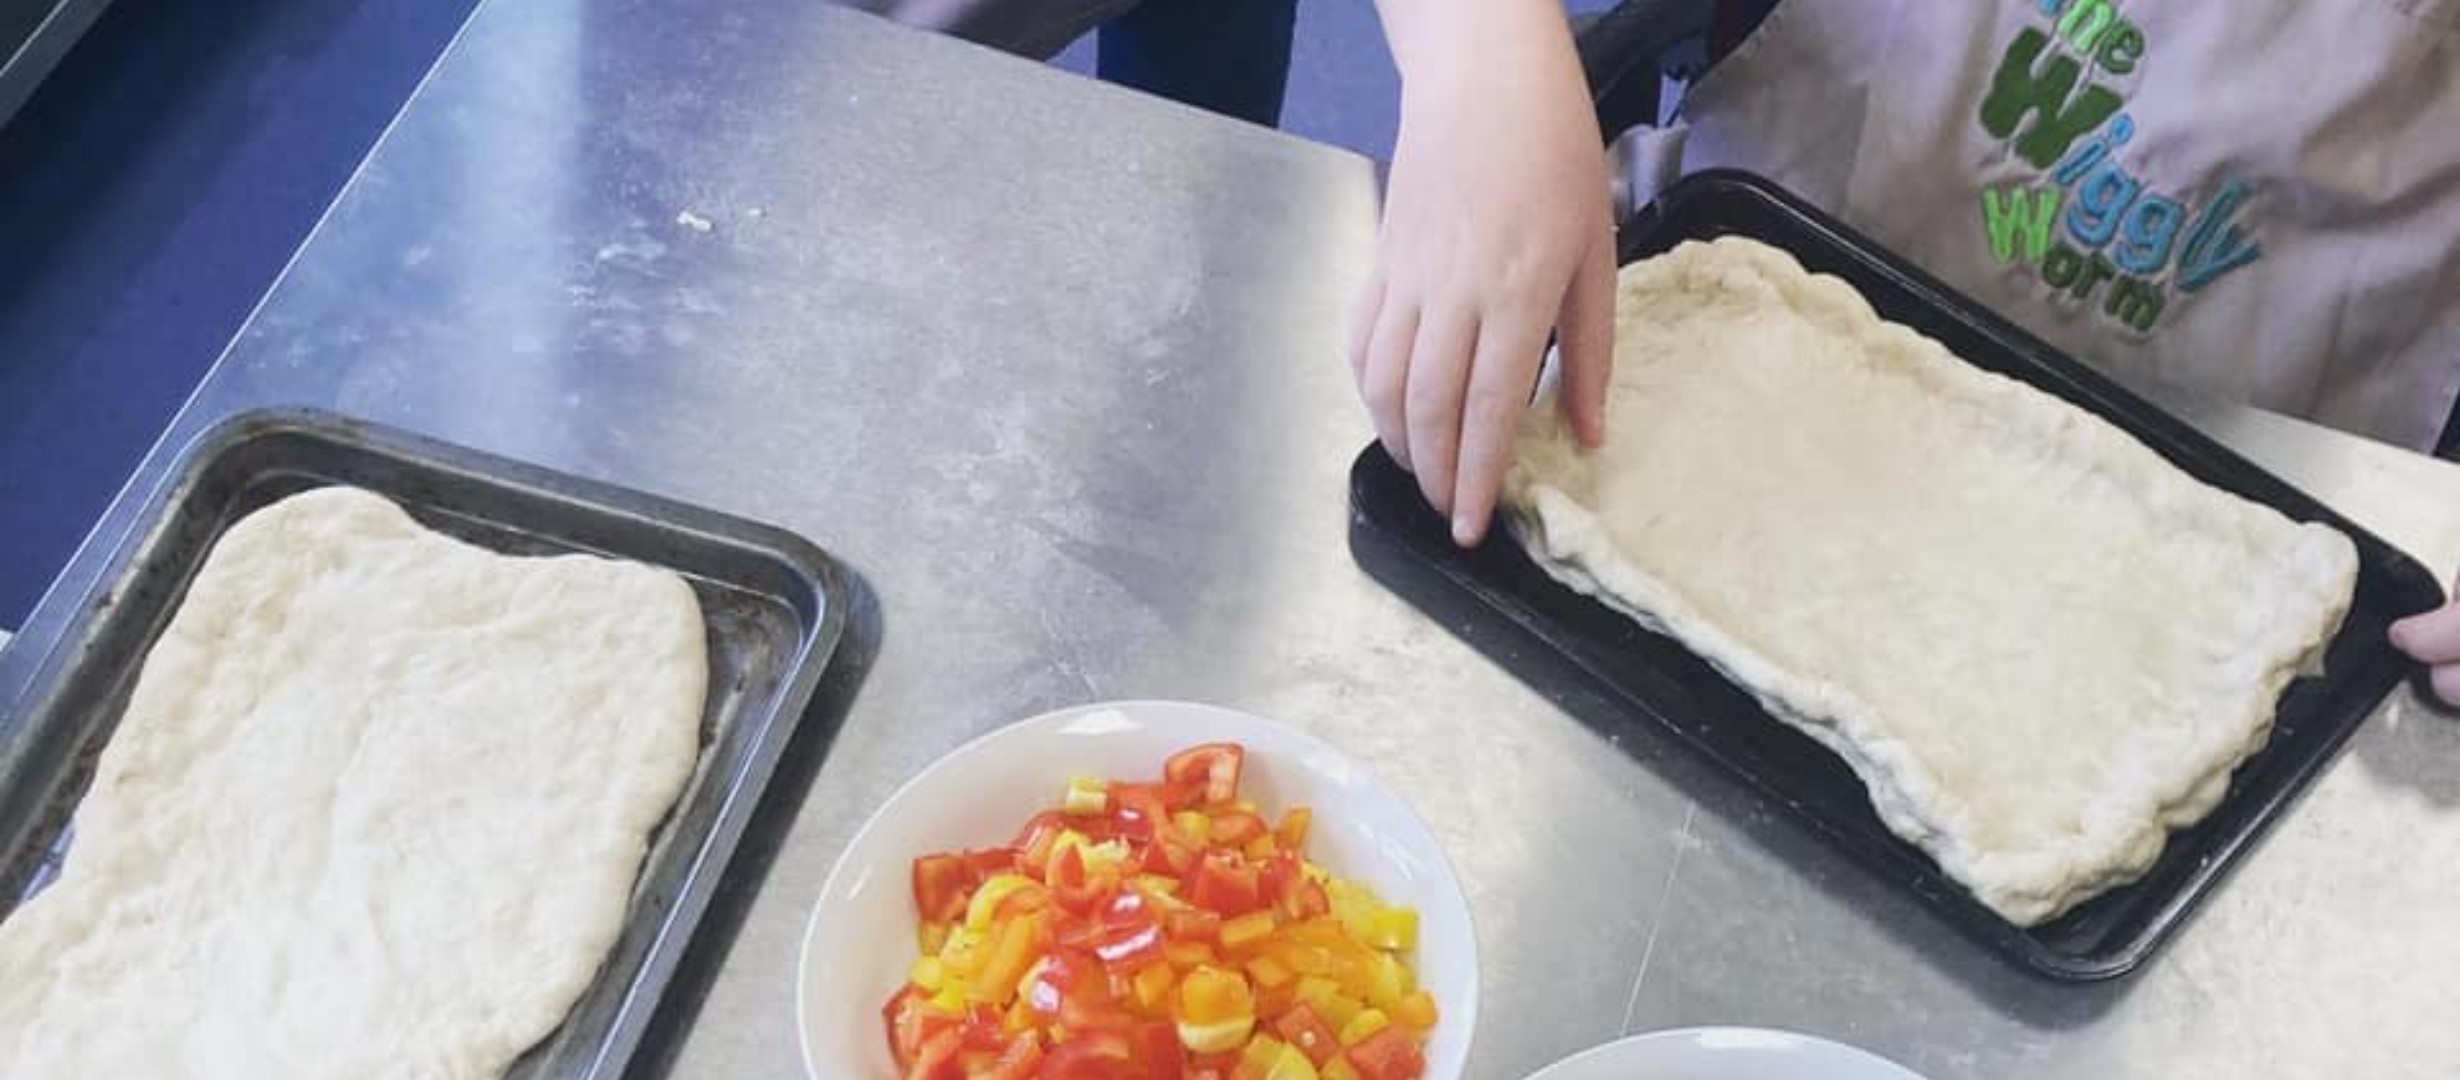 An image of someone putting peppers on pizza dough